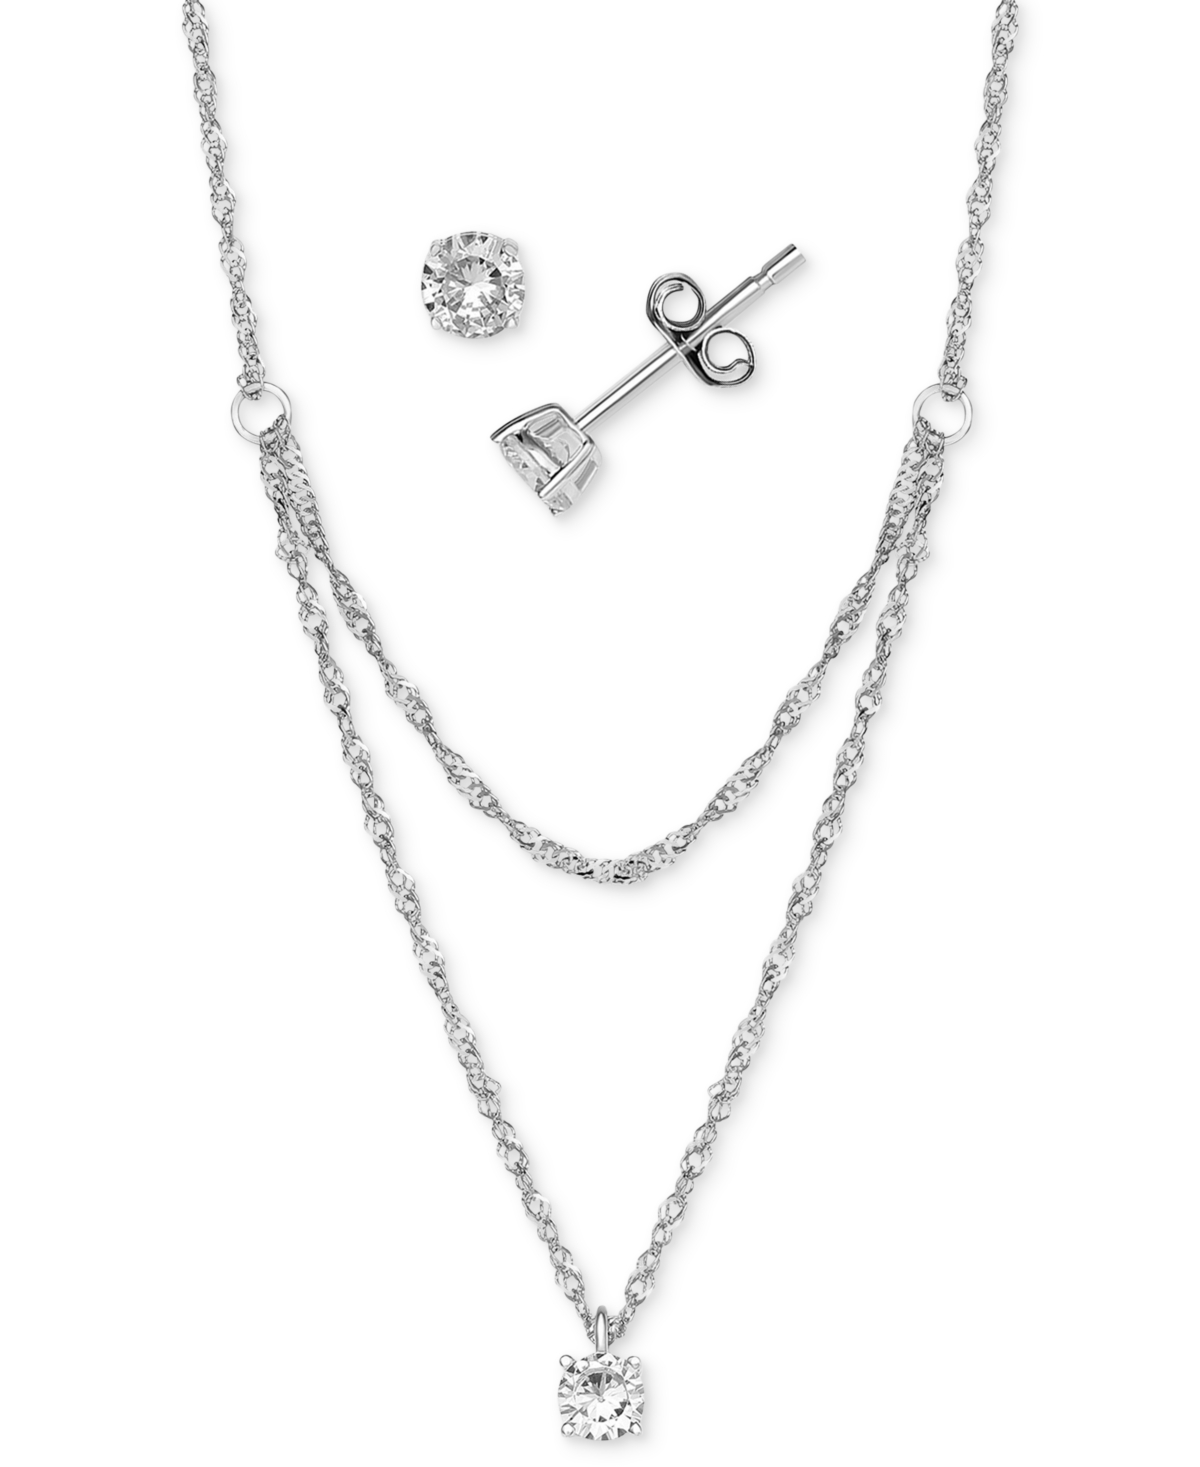 Giani Bernini 2-pc. Set Cubic Zirconia Layered Necklace & Solitaire Stud Earrings In Sterling Silver, Created For In White